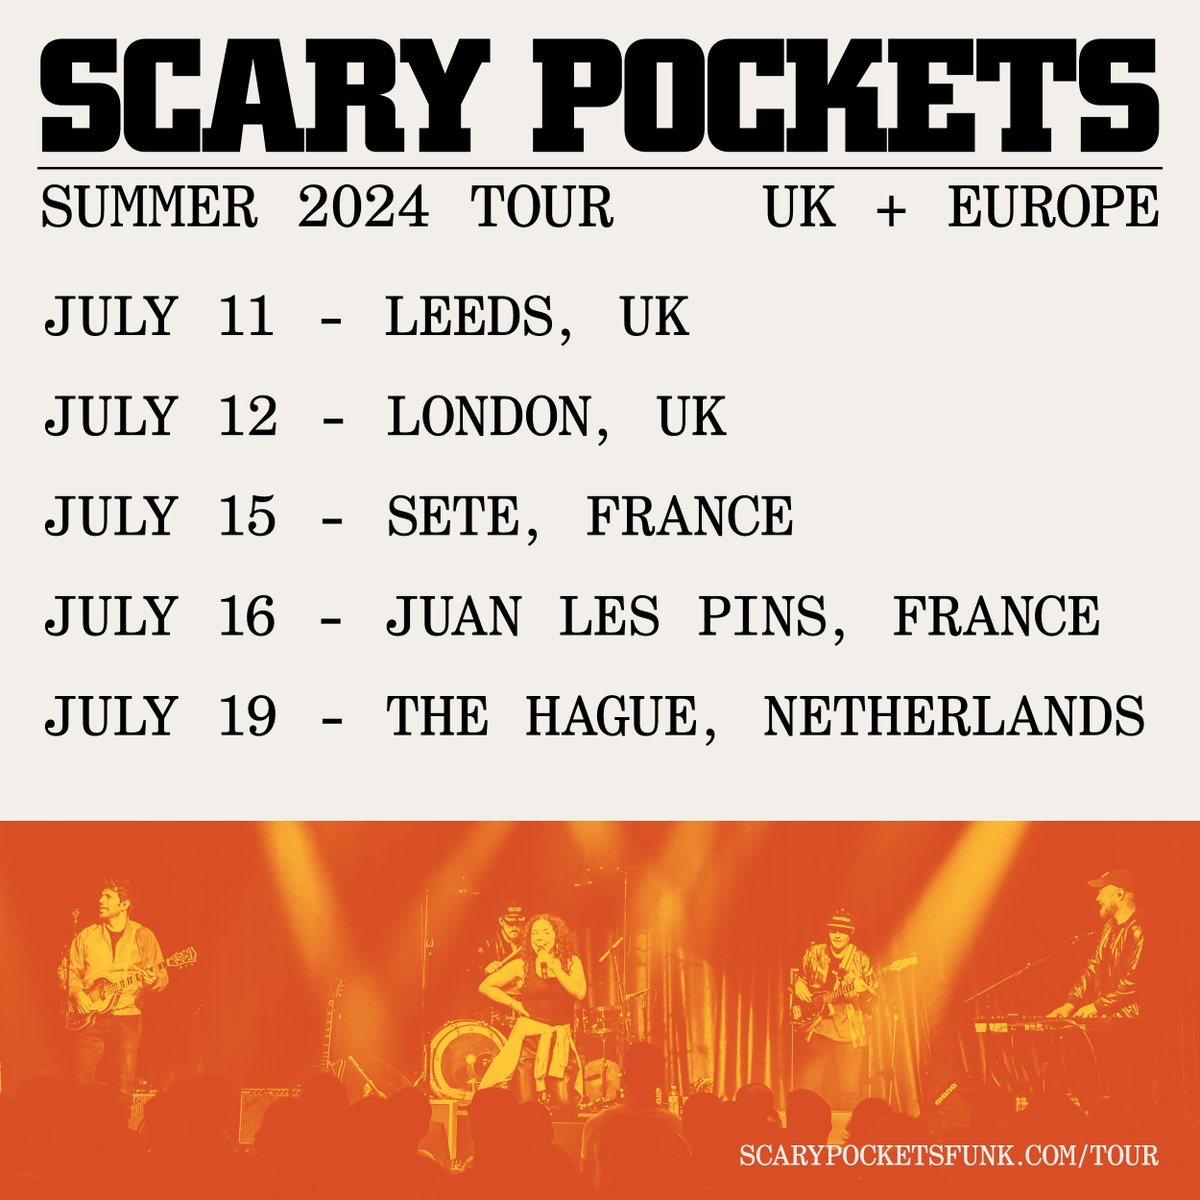 Tickets for our last tour dates of 2024 are live at scarypockets.com/tour! Come hang with us in Europe because seriously who would want to spend their summer anywhere else?